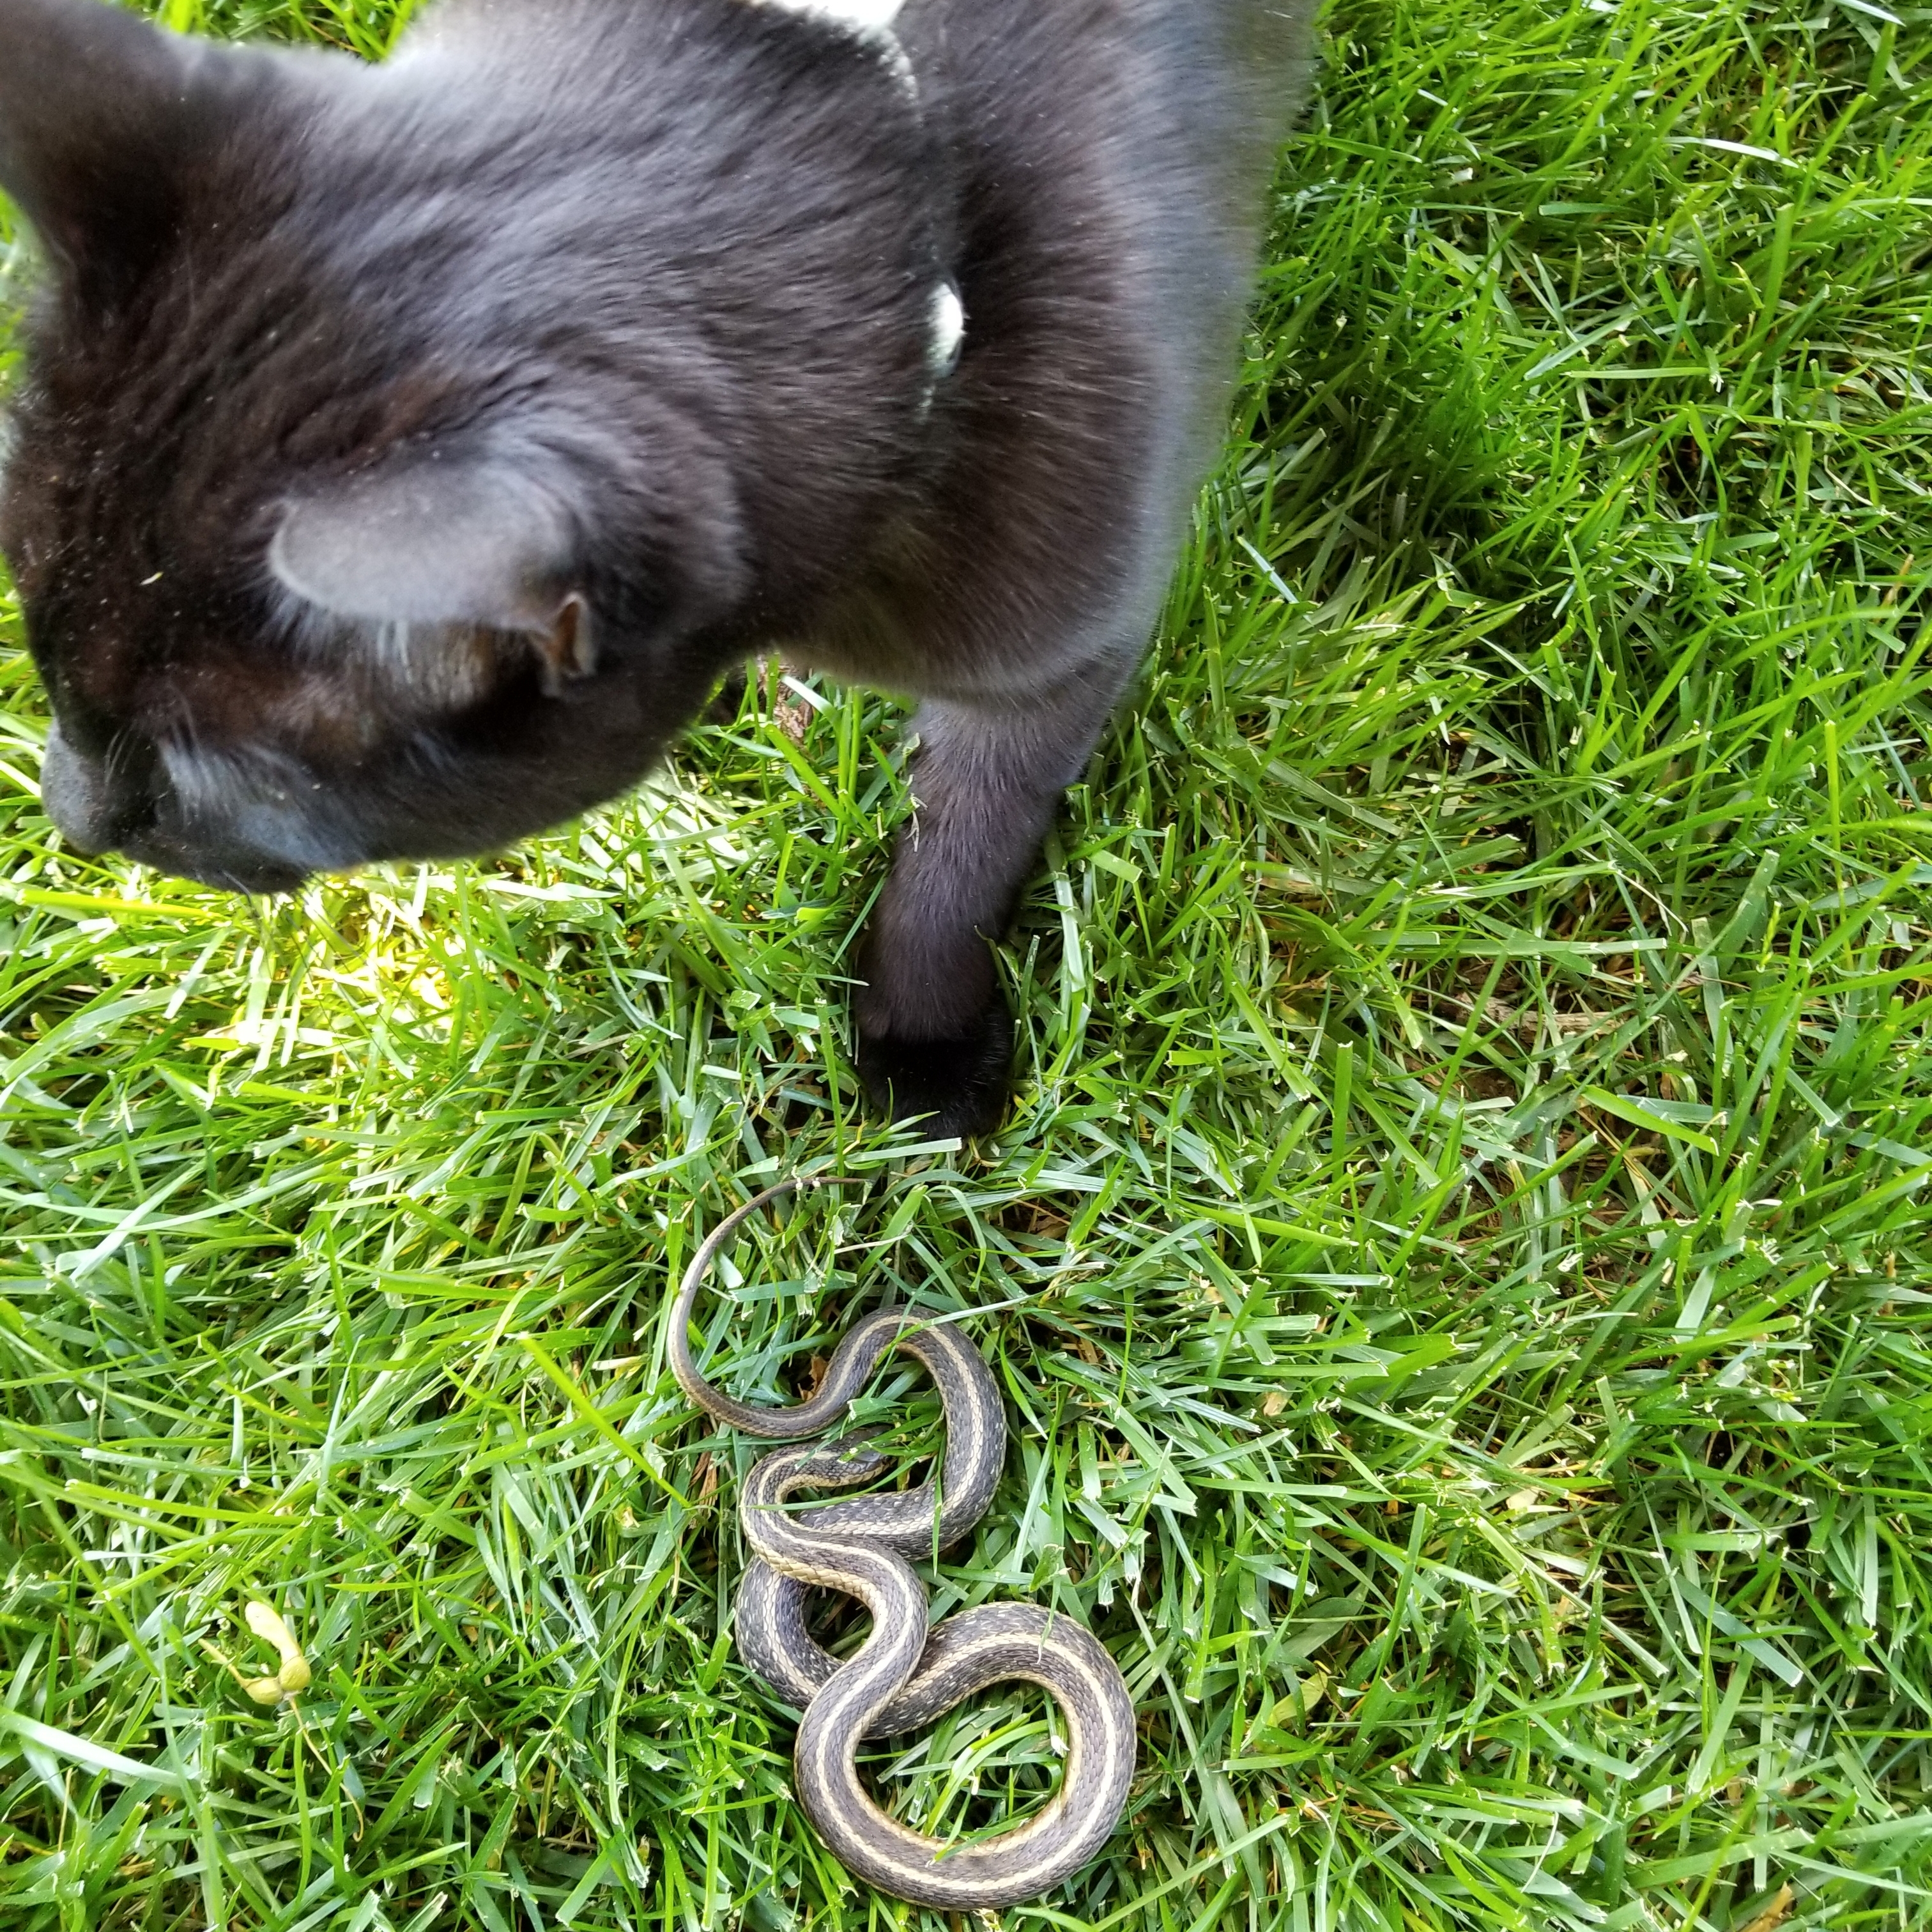 20190604_114455 Gus and his snake